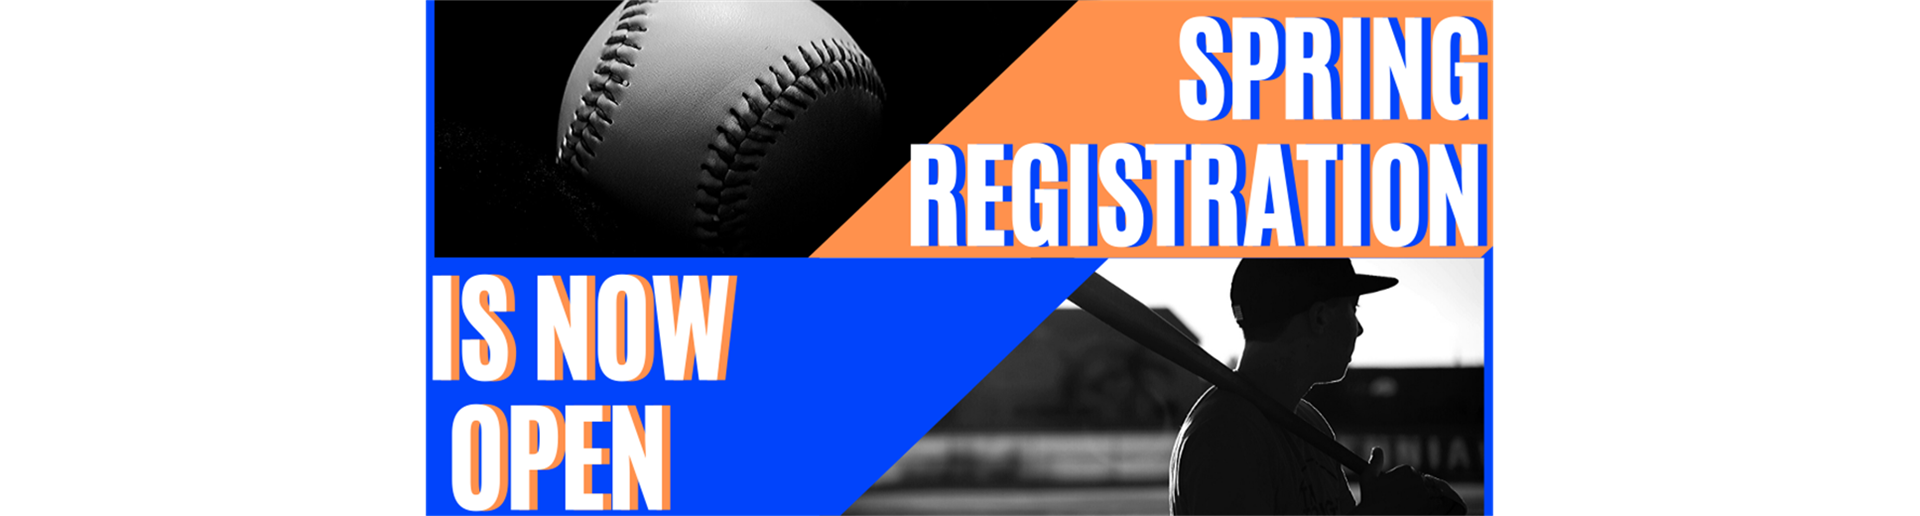 SPRING REGISTRATION IS NOW OPEN!!